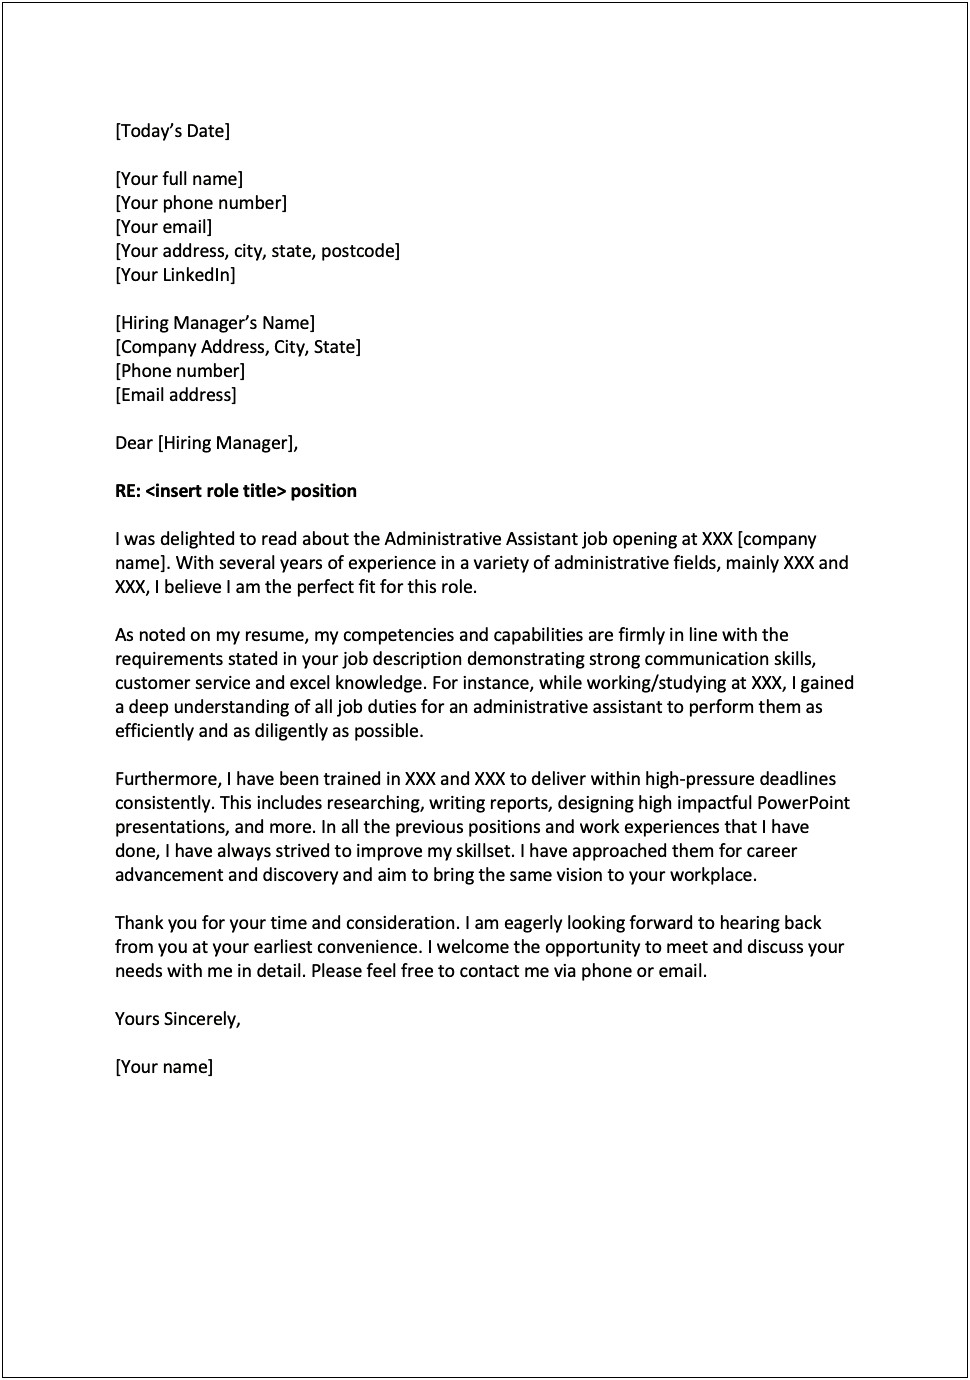 Sample Executive Assistant Resume Cover Letter